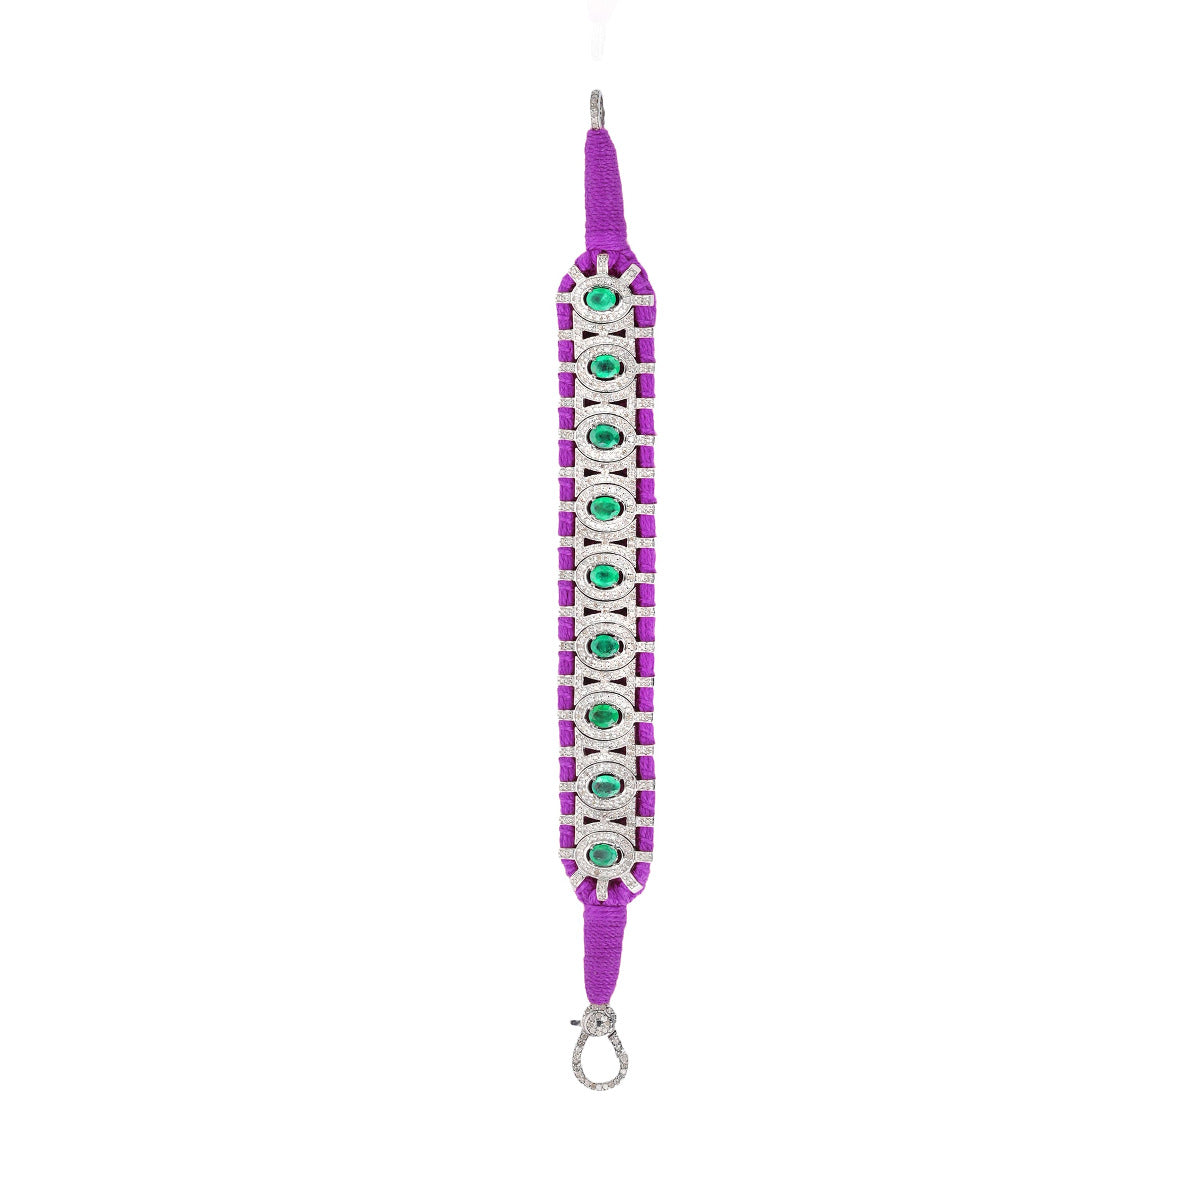 Sao Paulo Violet and Emeralds bracelet in 925 silver and diamonds